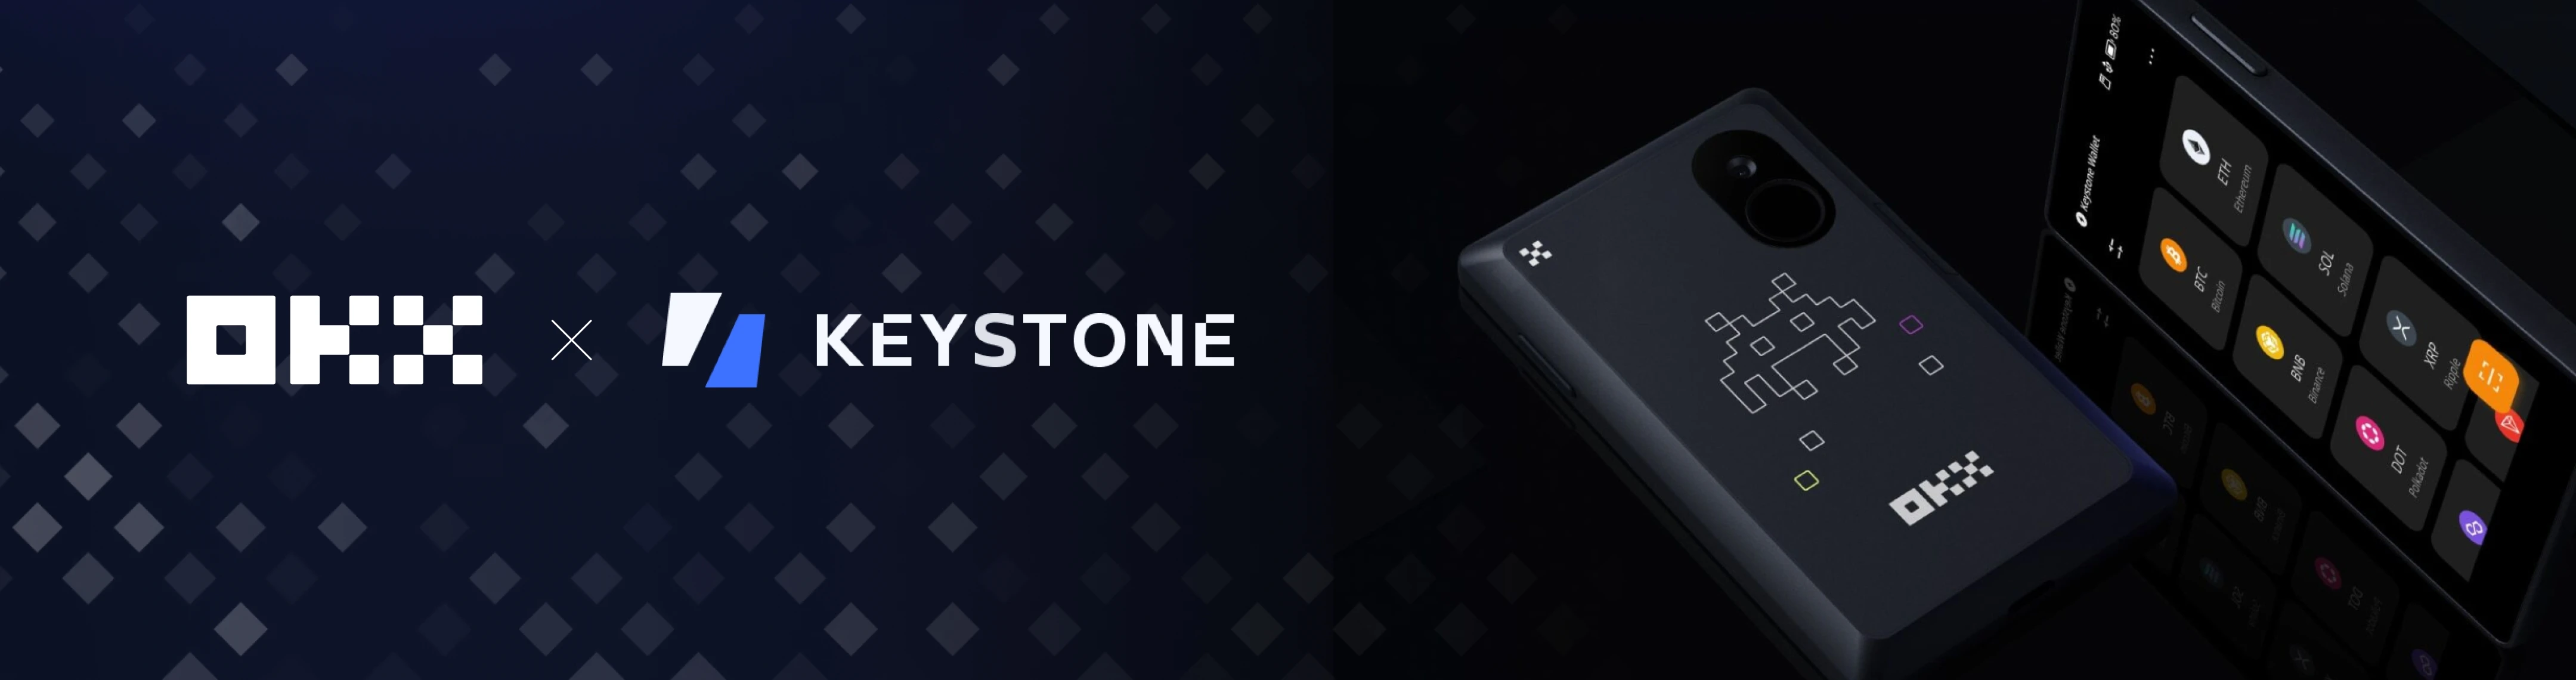 OKX × Keystone3 Pro, limited discount coupons. Hurry and subscribe now!